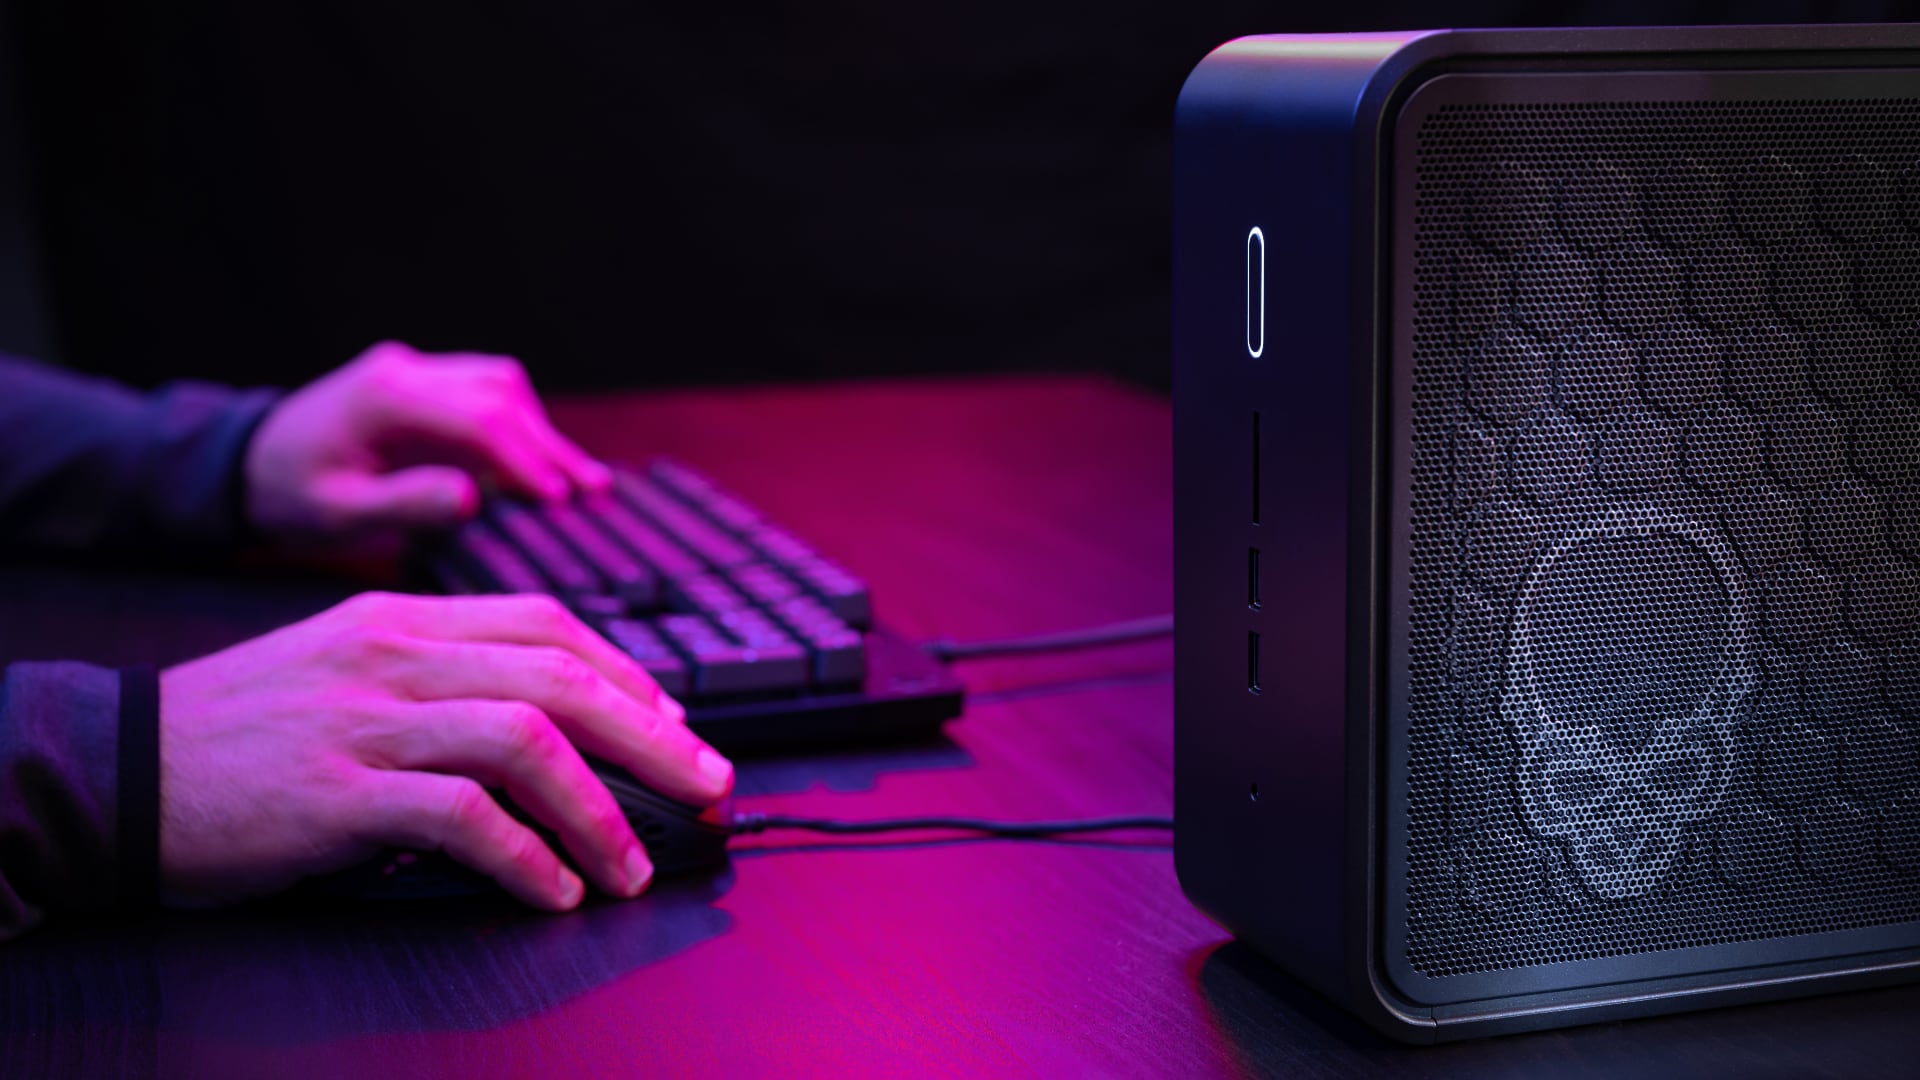 Intel NUC 9 is the king of runt sized computers